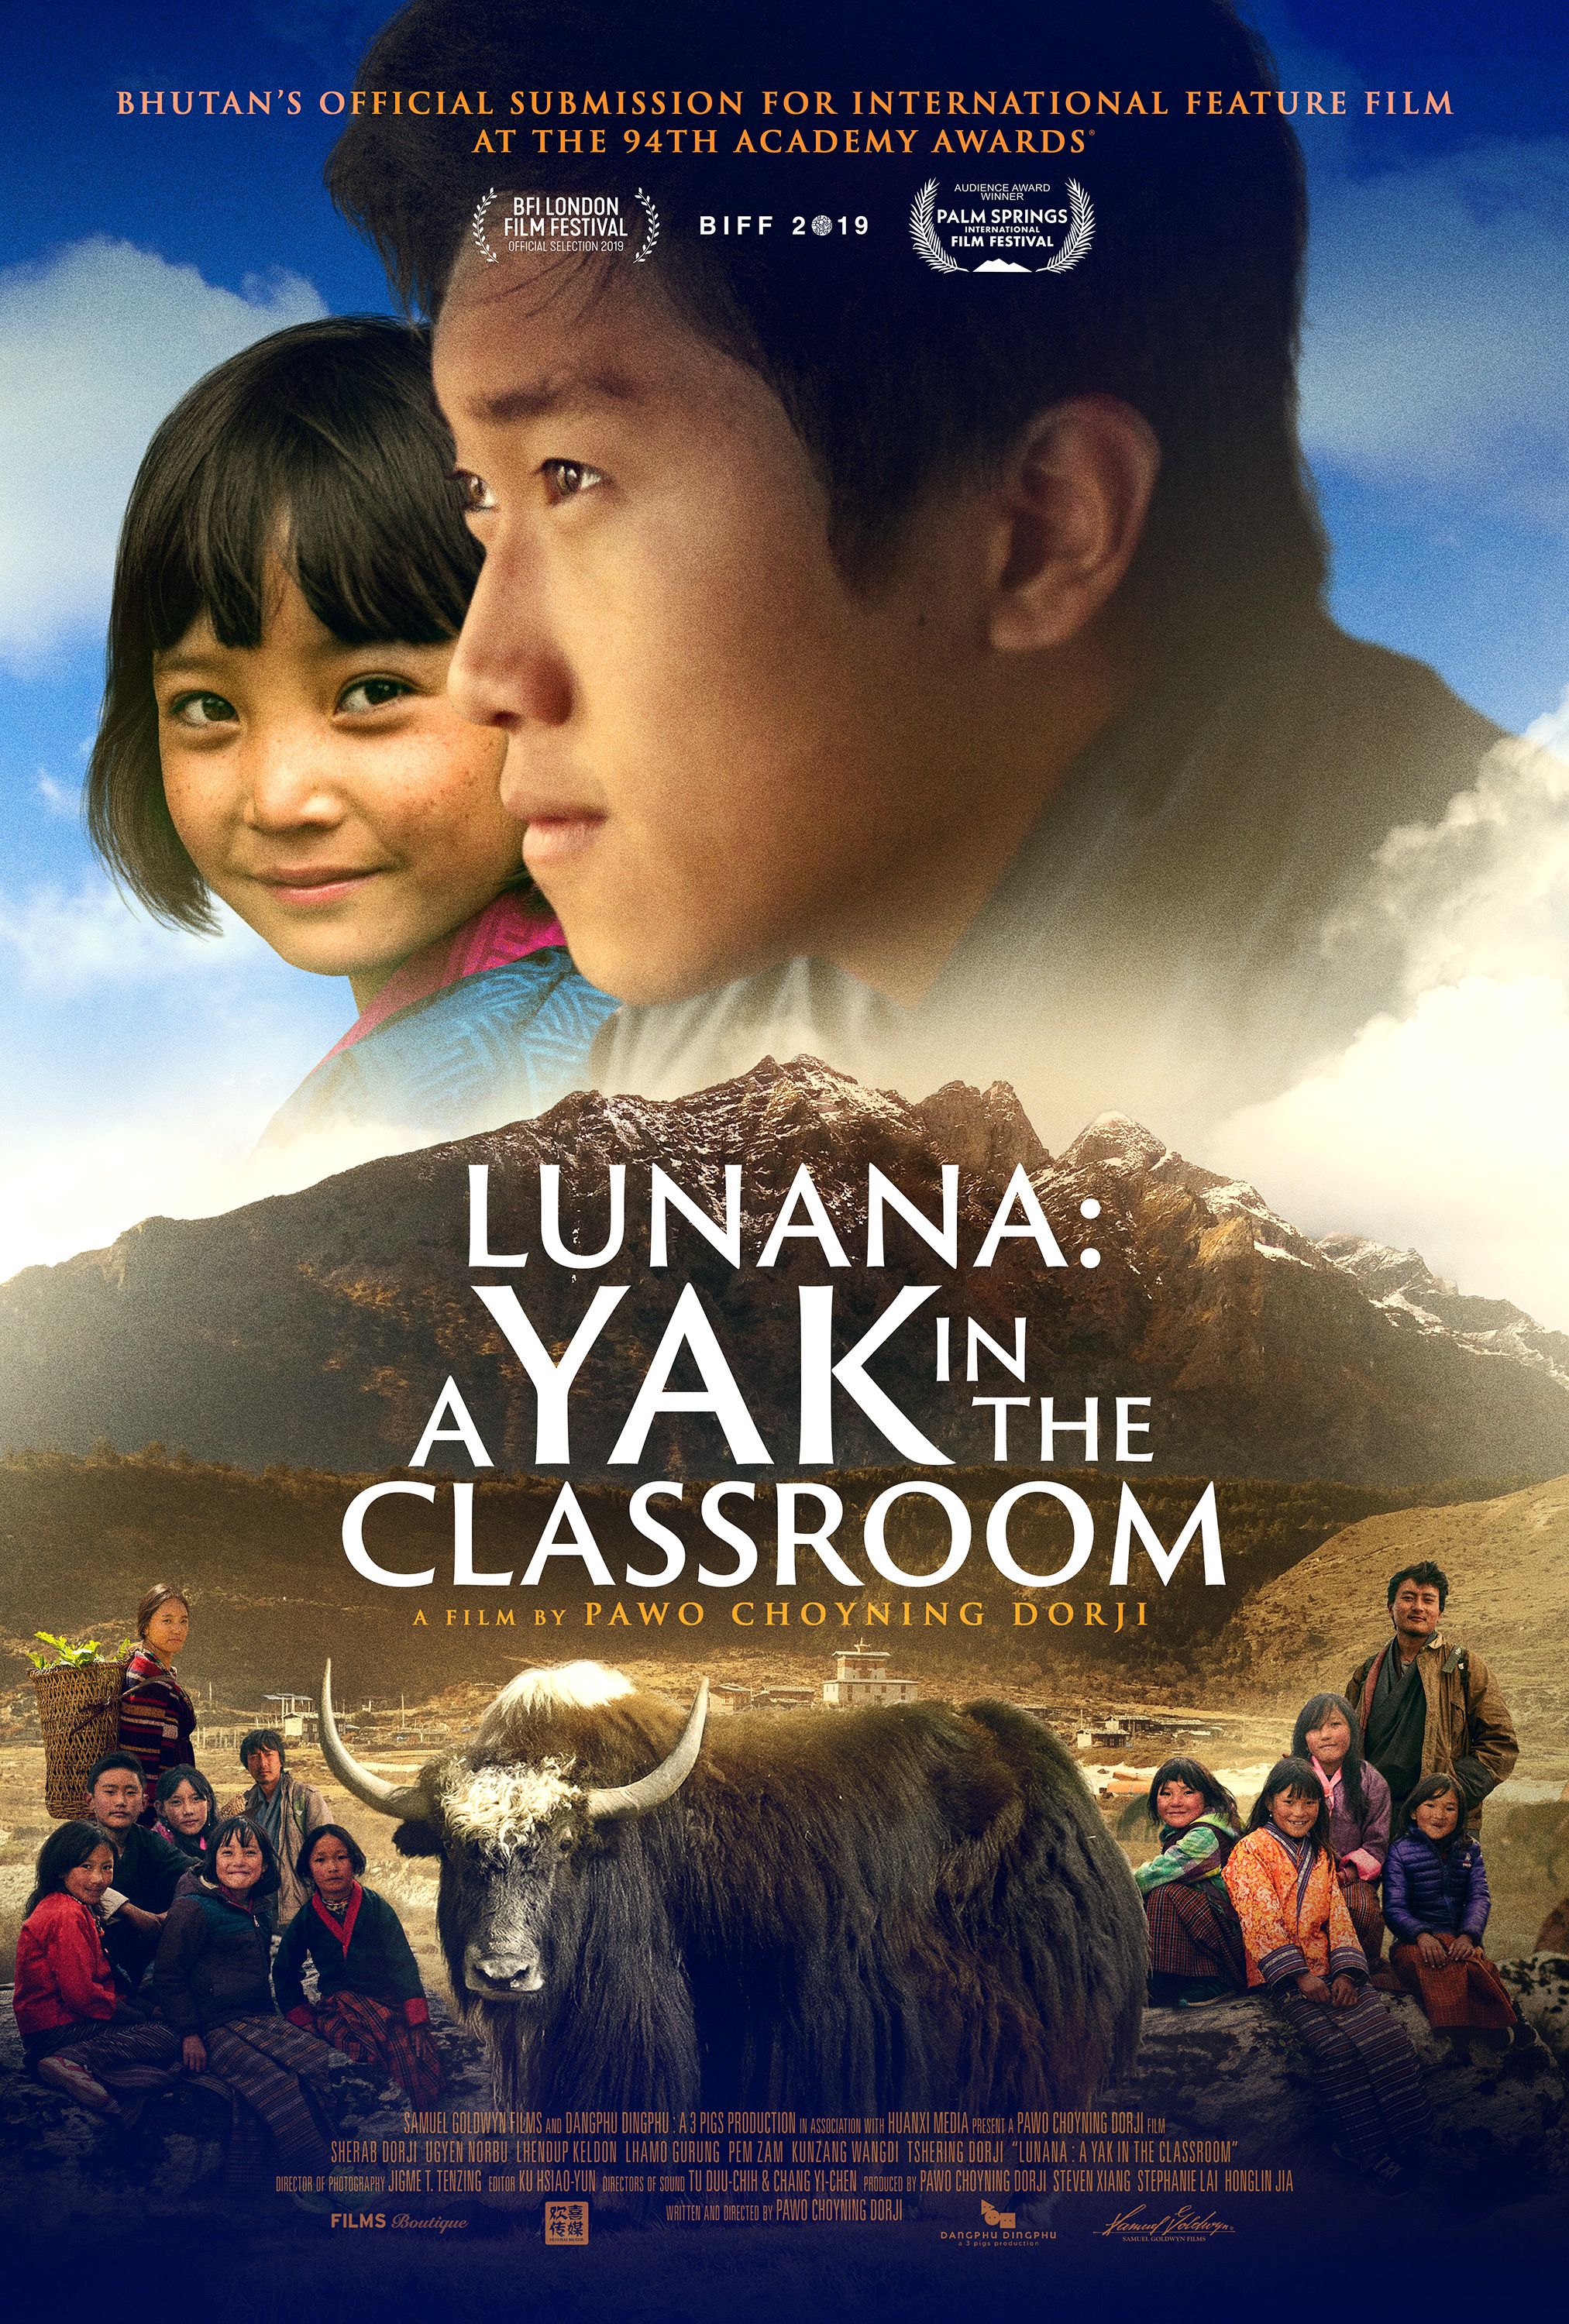 Lunana: A Yak in the Classroom (2019) Hindi Dubbed HDRip download full movie